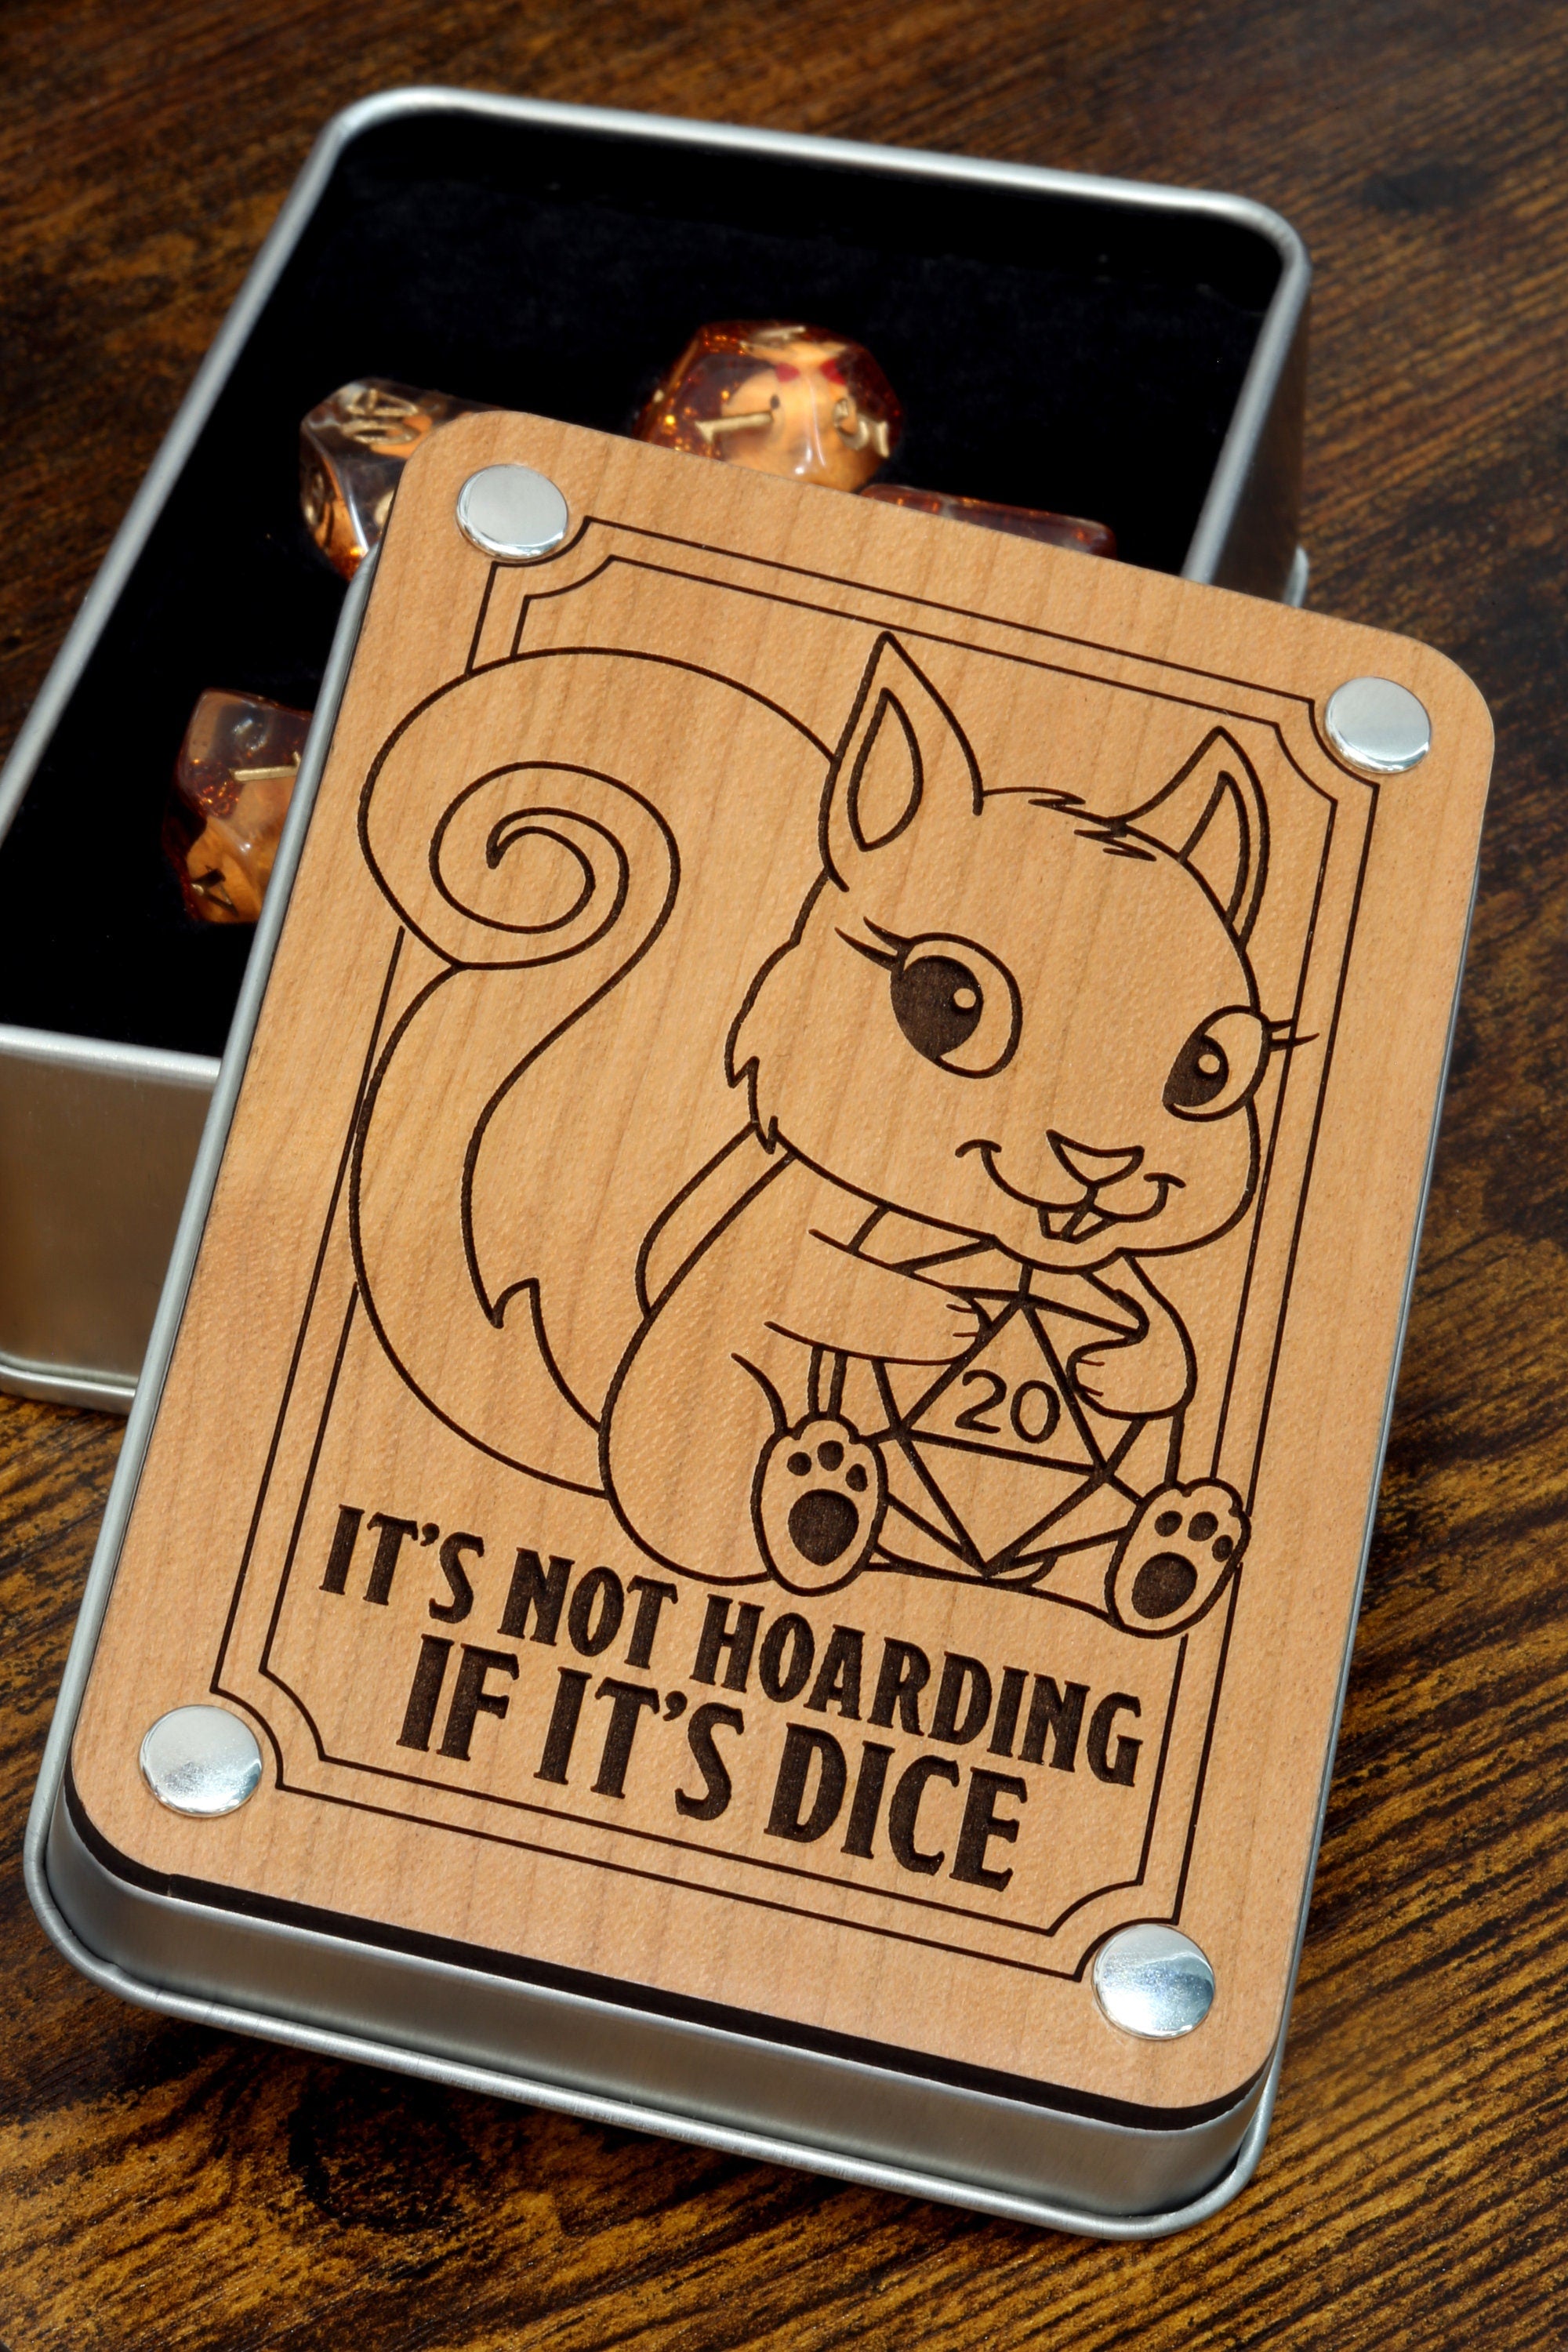 It's not hoarding if it's dice box and Squirrel dice set